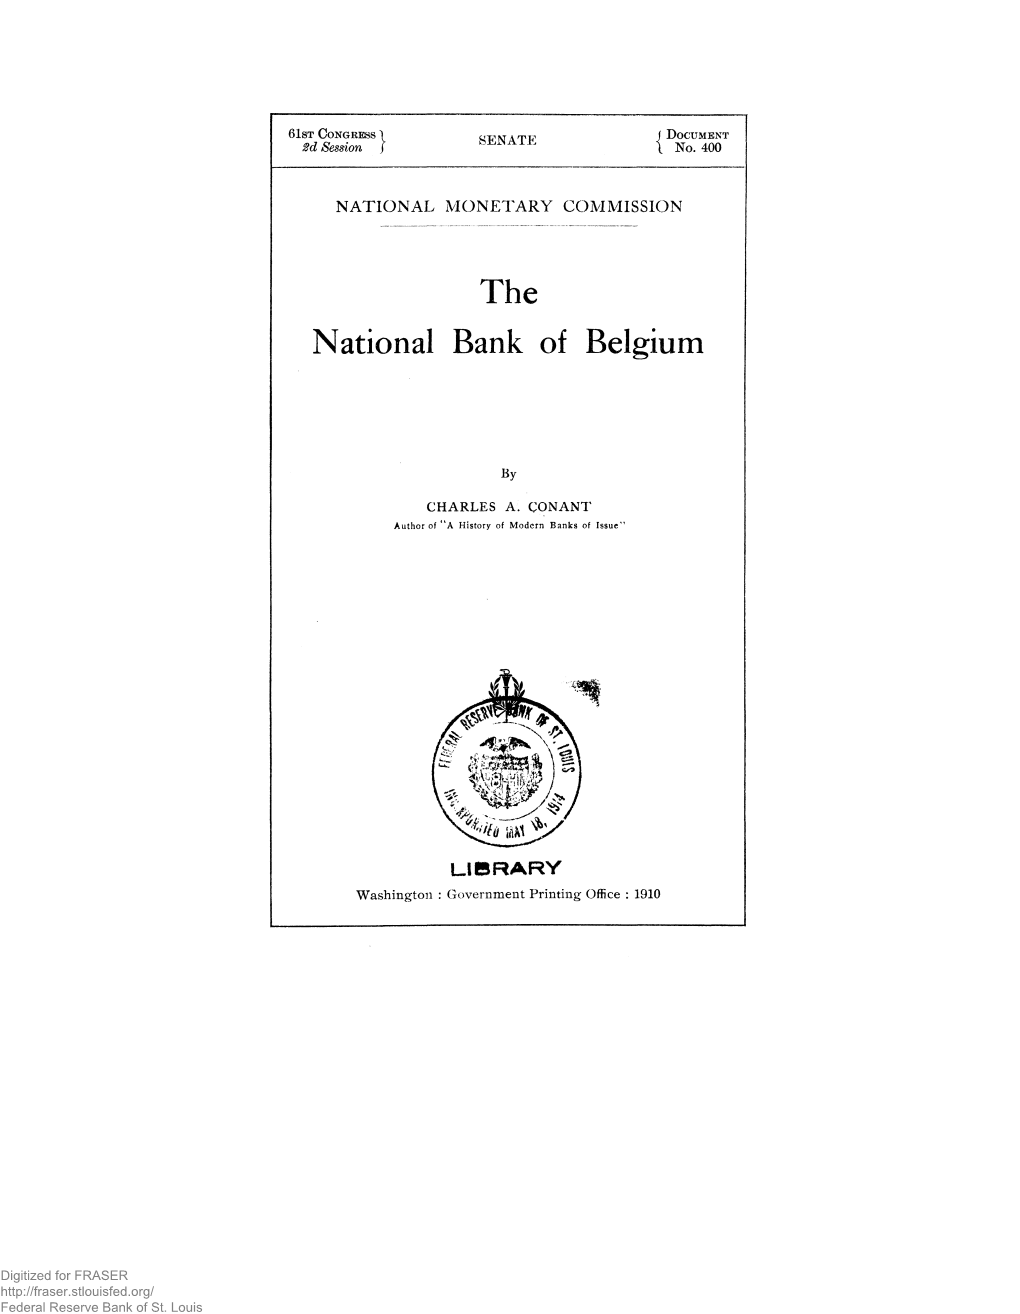 The National Bank of Belgium. National Monetary Commission Document No